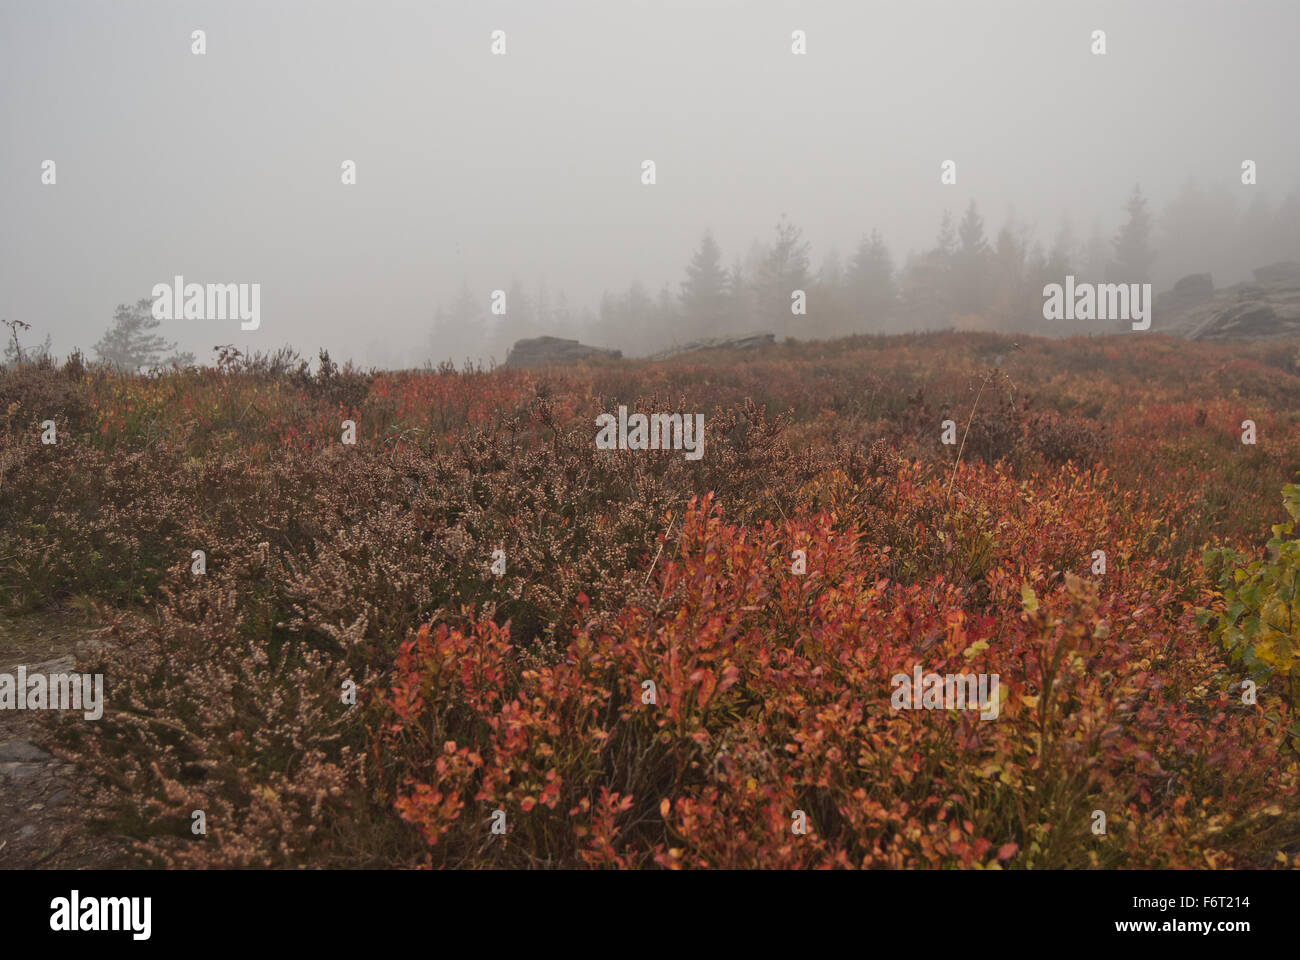 heath with heather and bilberry growth on Vysoky kamen hill in Krusne hory mountains during misty autumn day Stock Photo